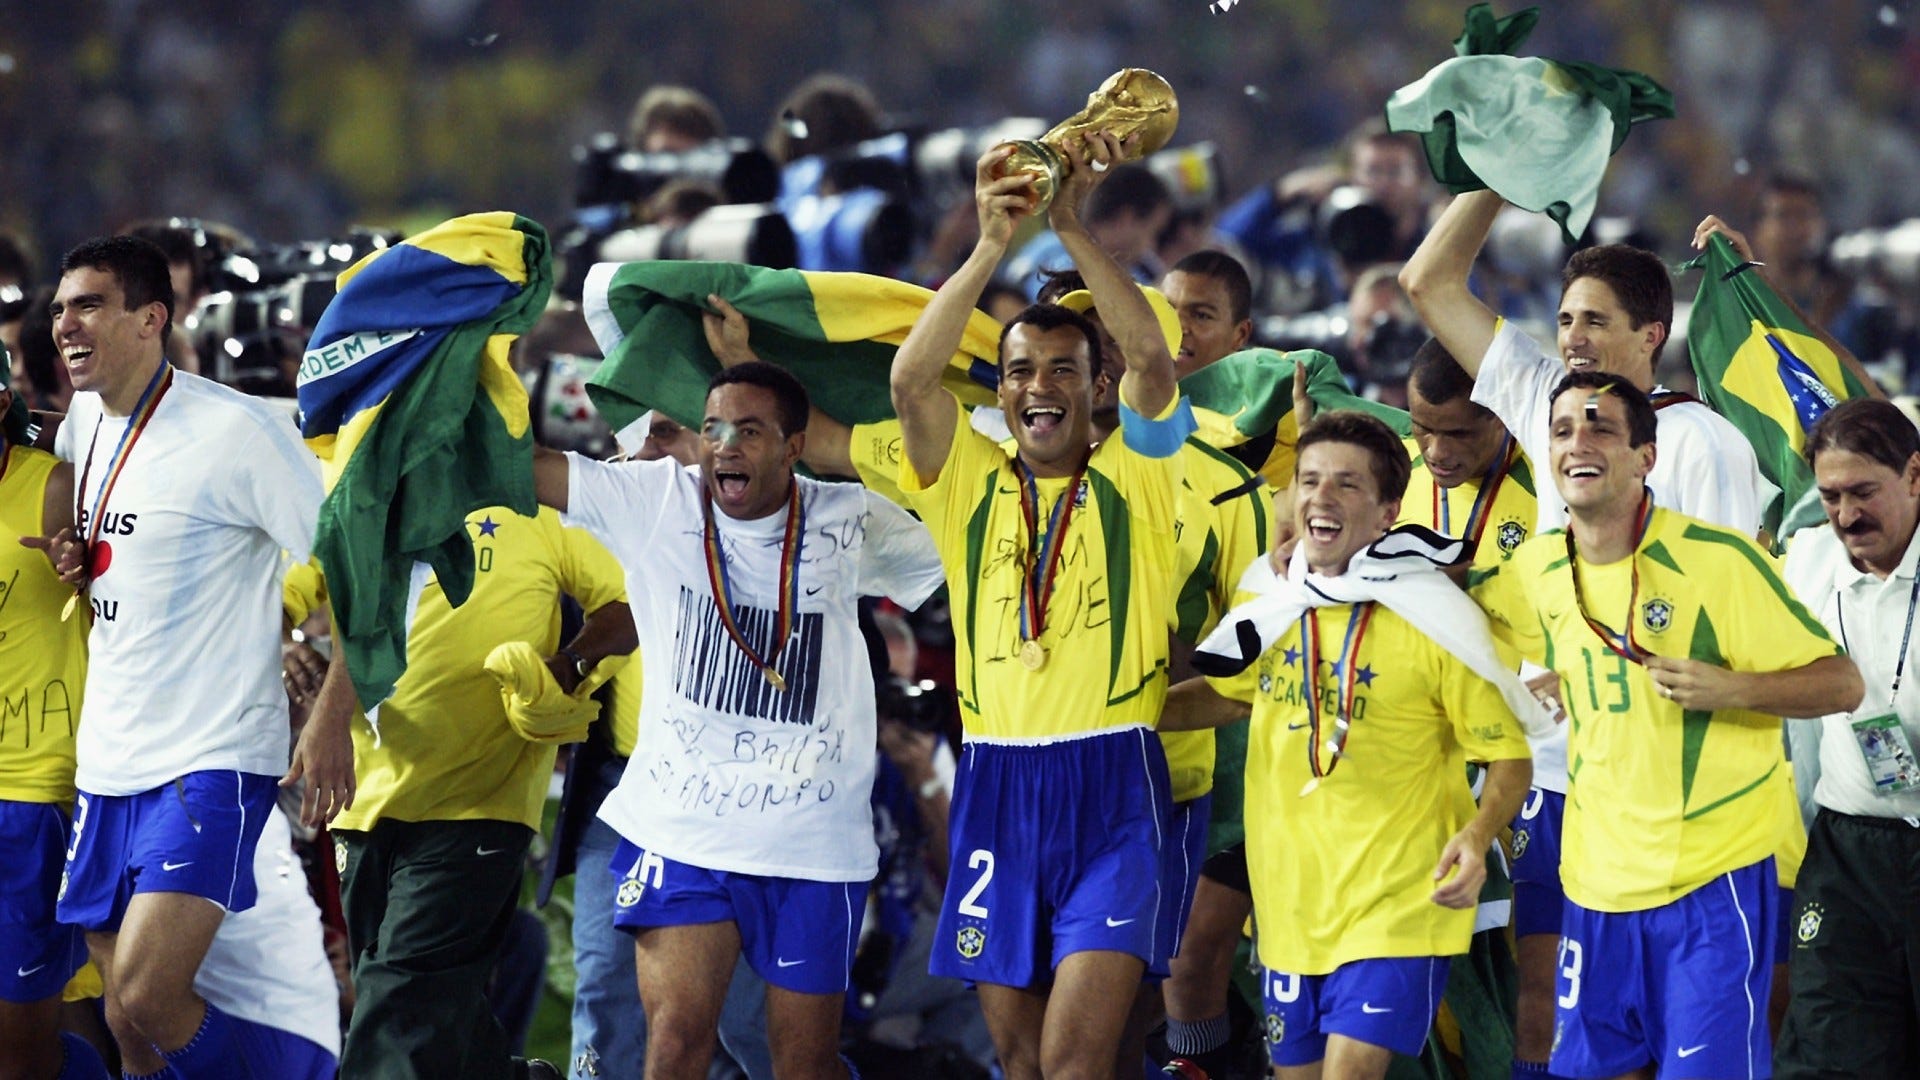 Brazil's 2002 World Cup winning team Who were the players and where